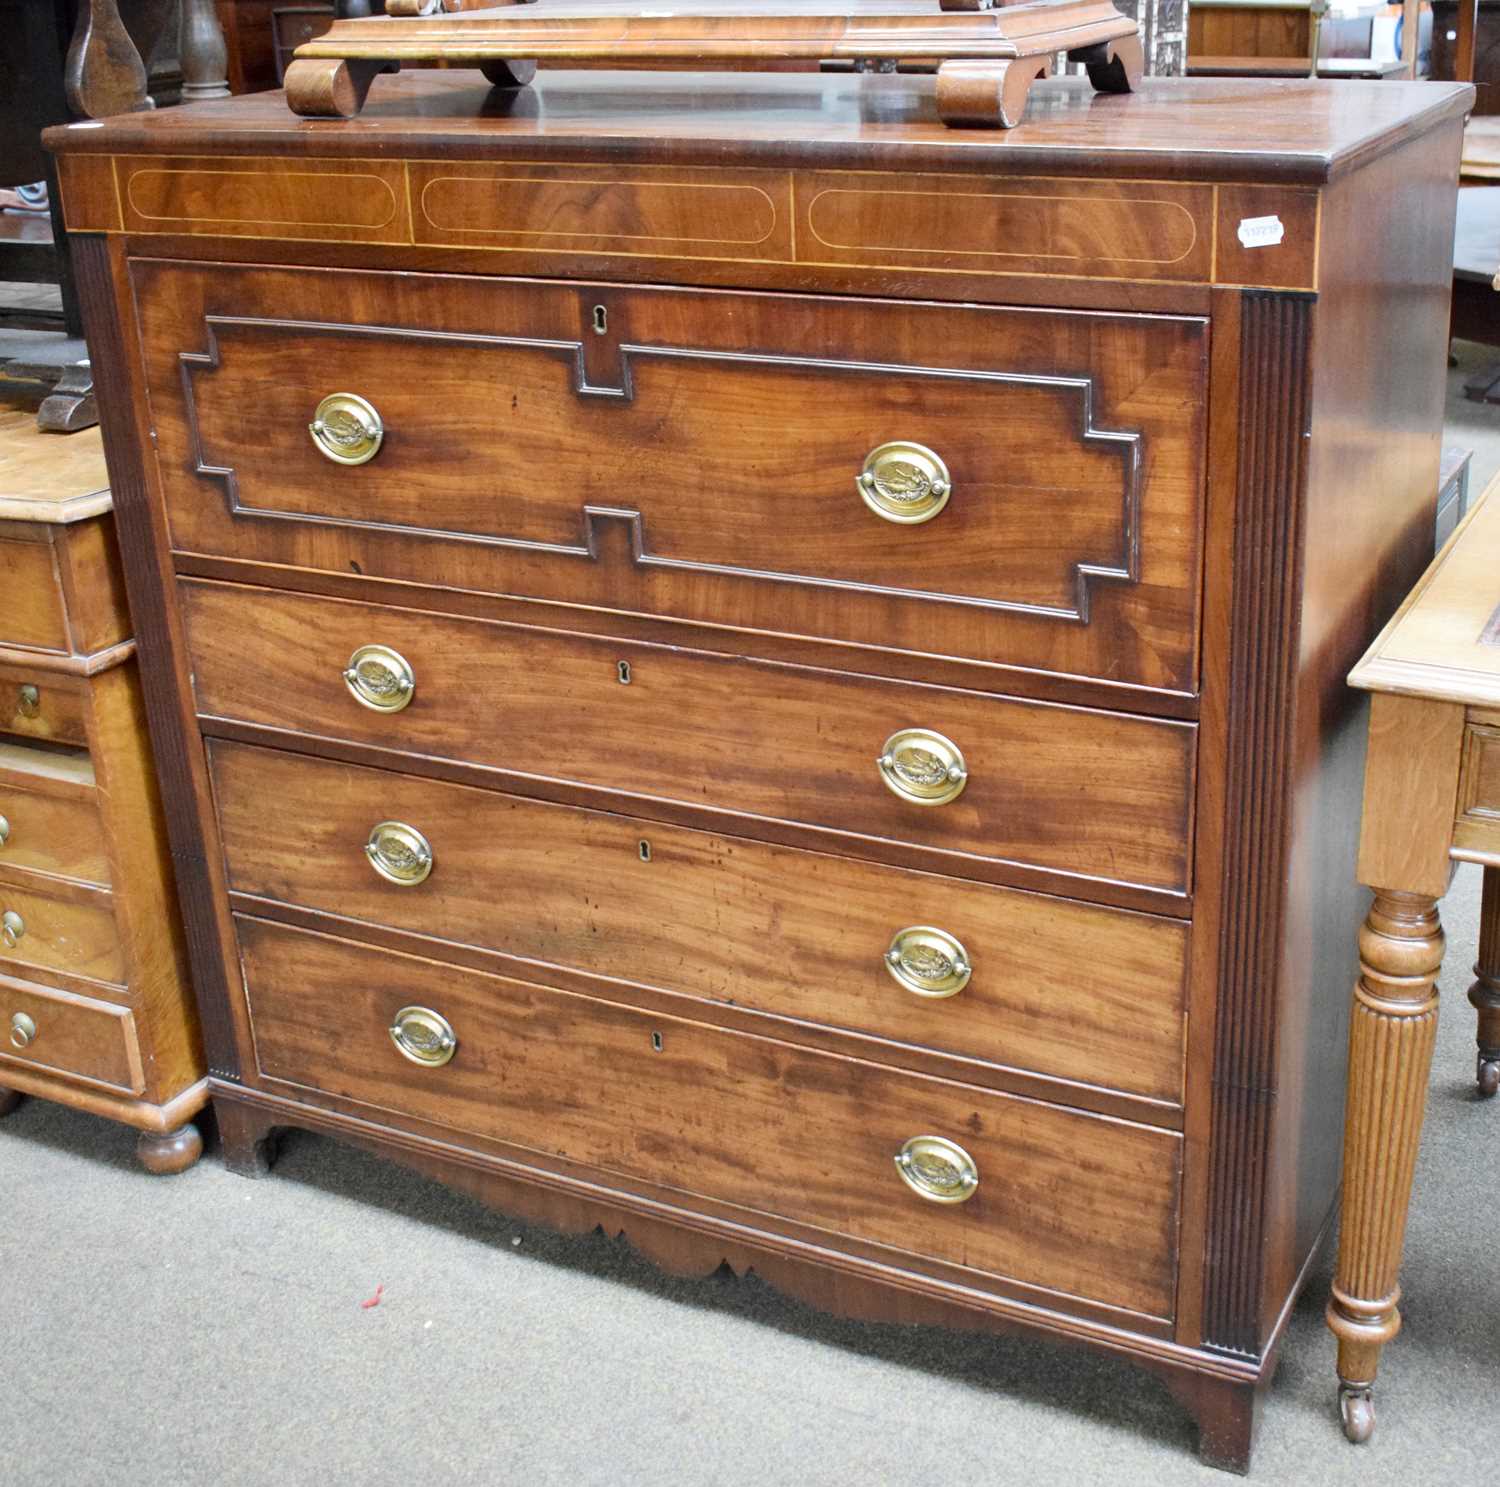 A Regency Mahogany Secretaire Chest, with strung inlay, fluted side supports, fitted interior, and